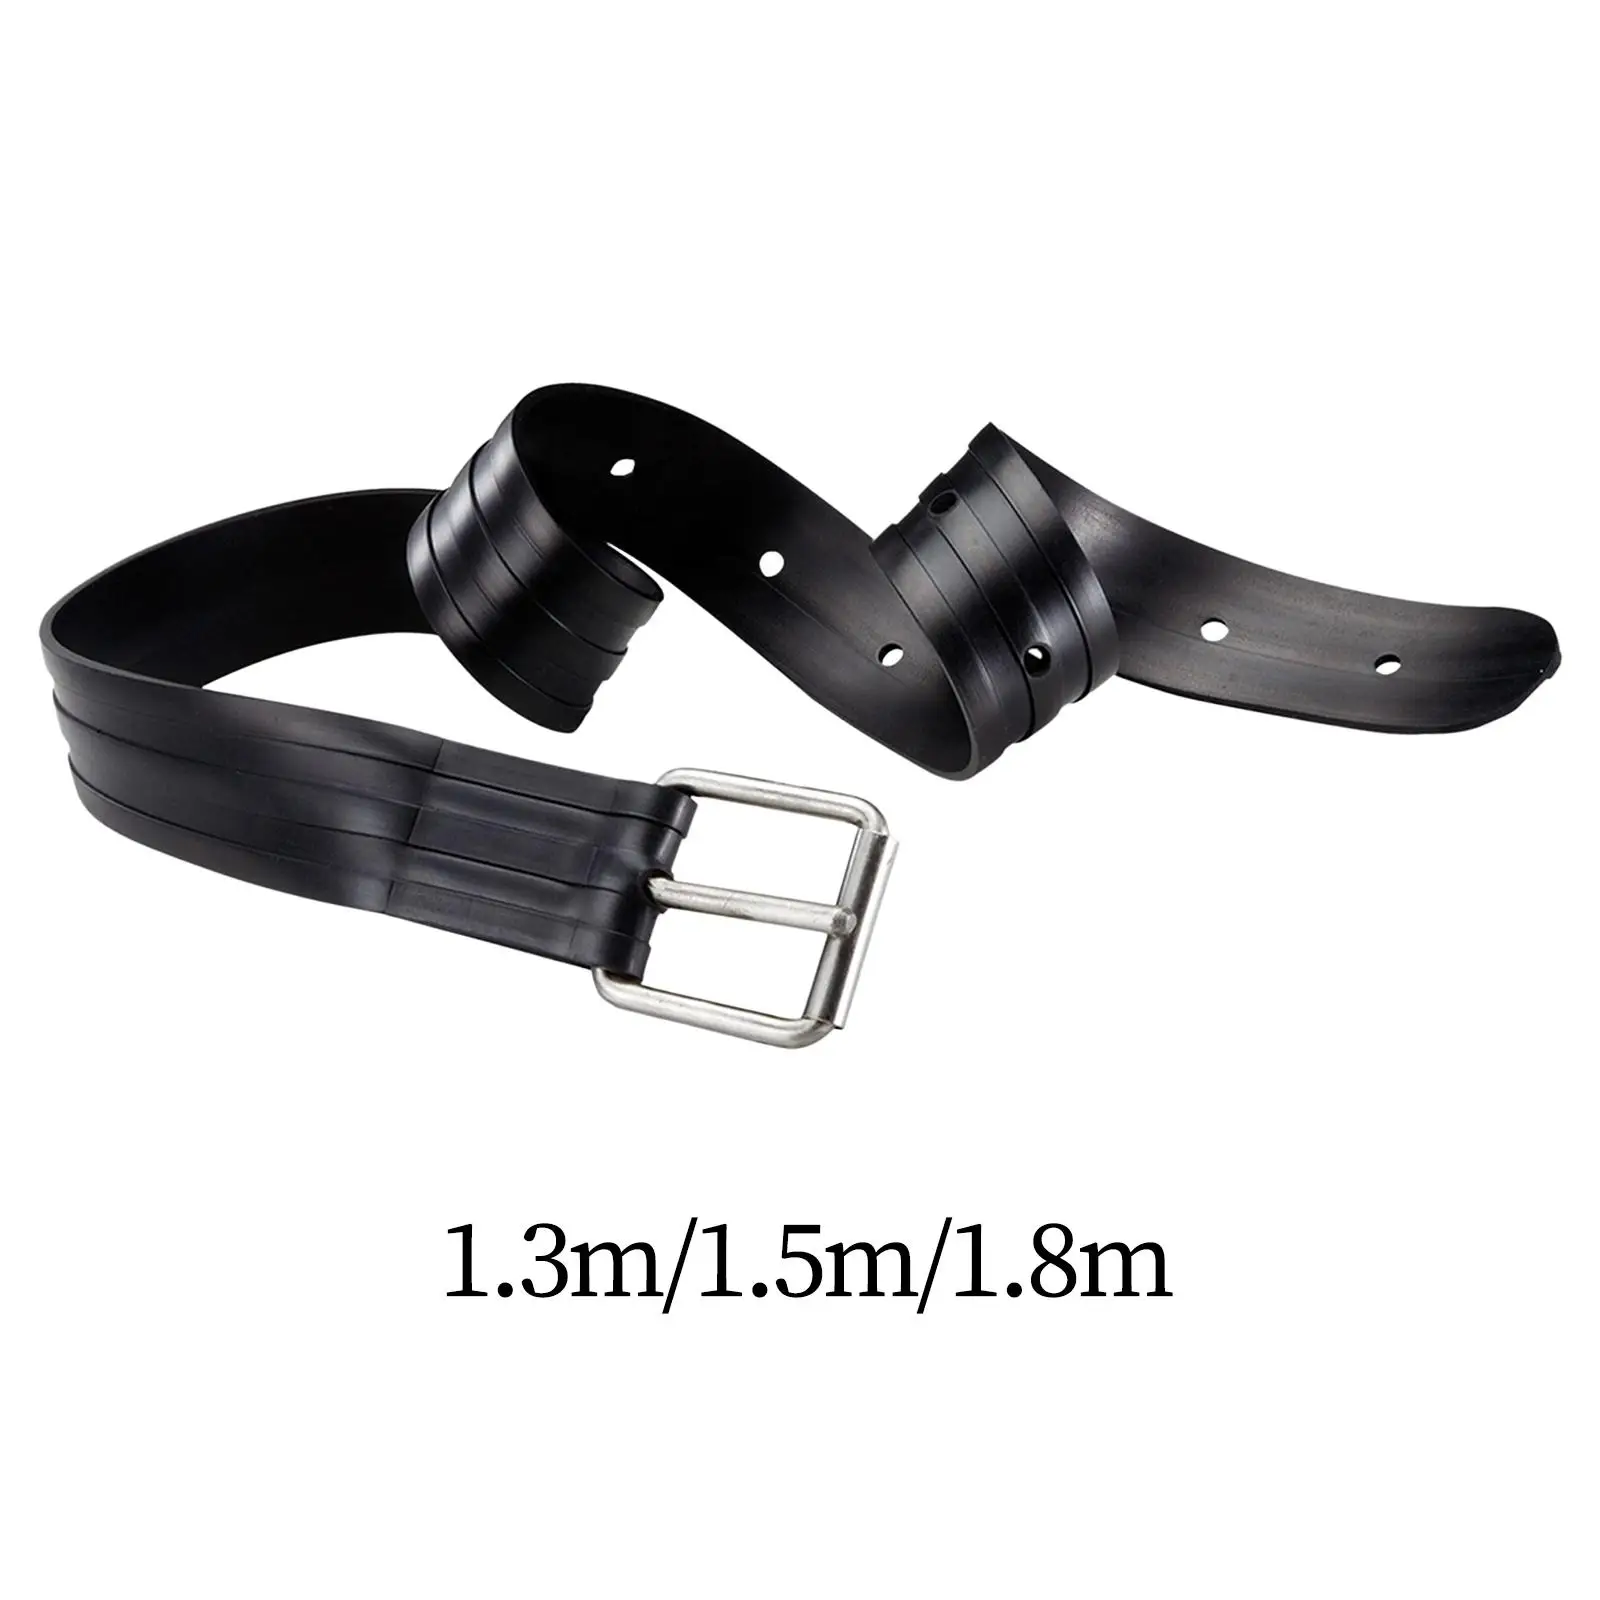 Weight Diving Belt to Help Divers Rubber Waist Belt Weight Strap Belts Webbing for Outdoor Underwater Sports Spearfishing